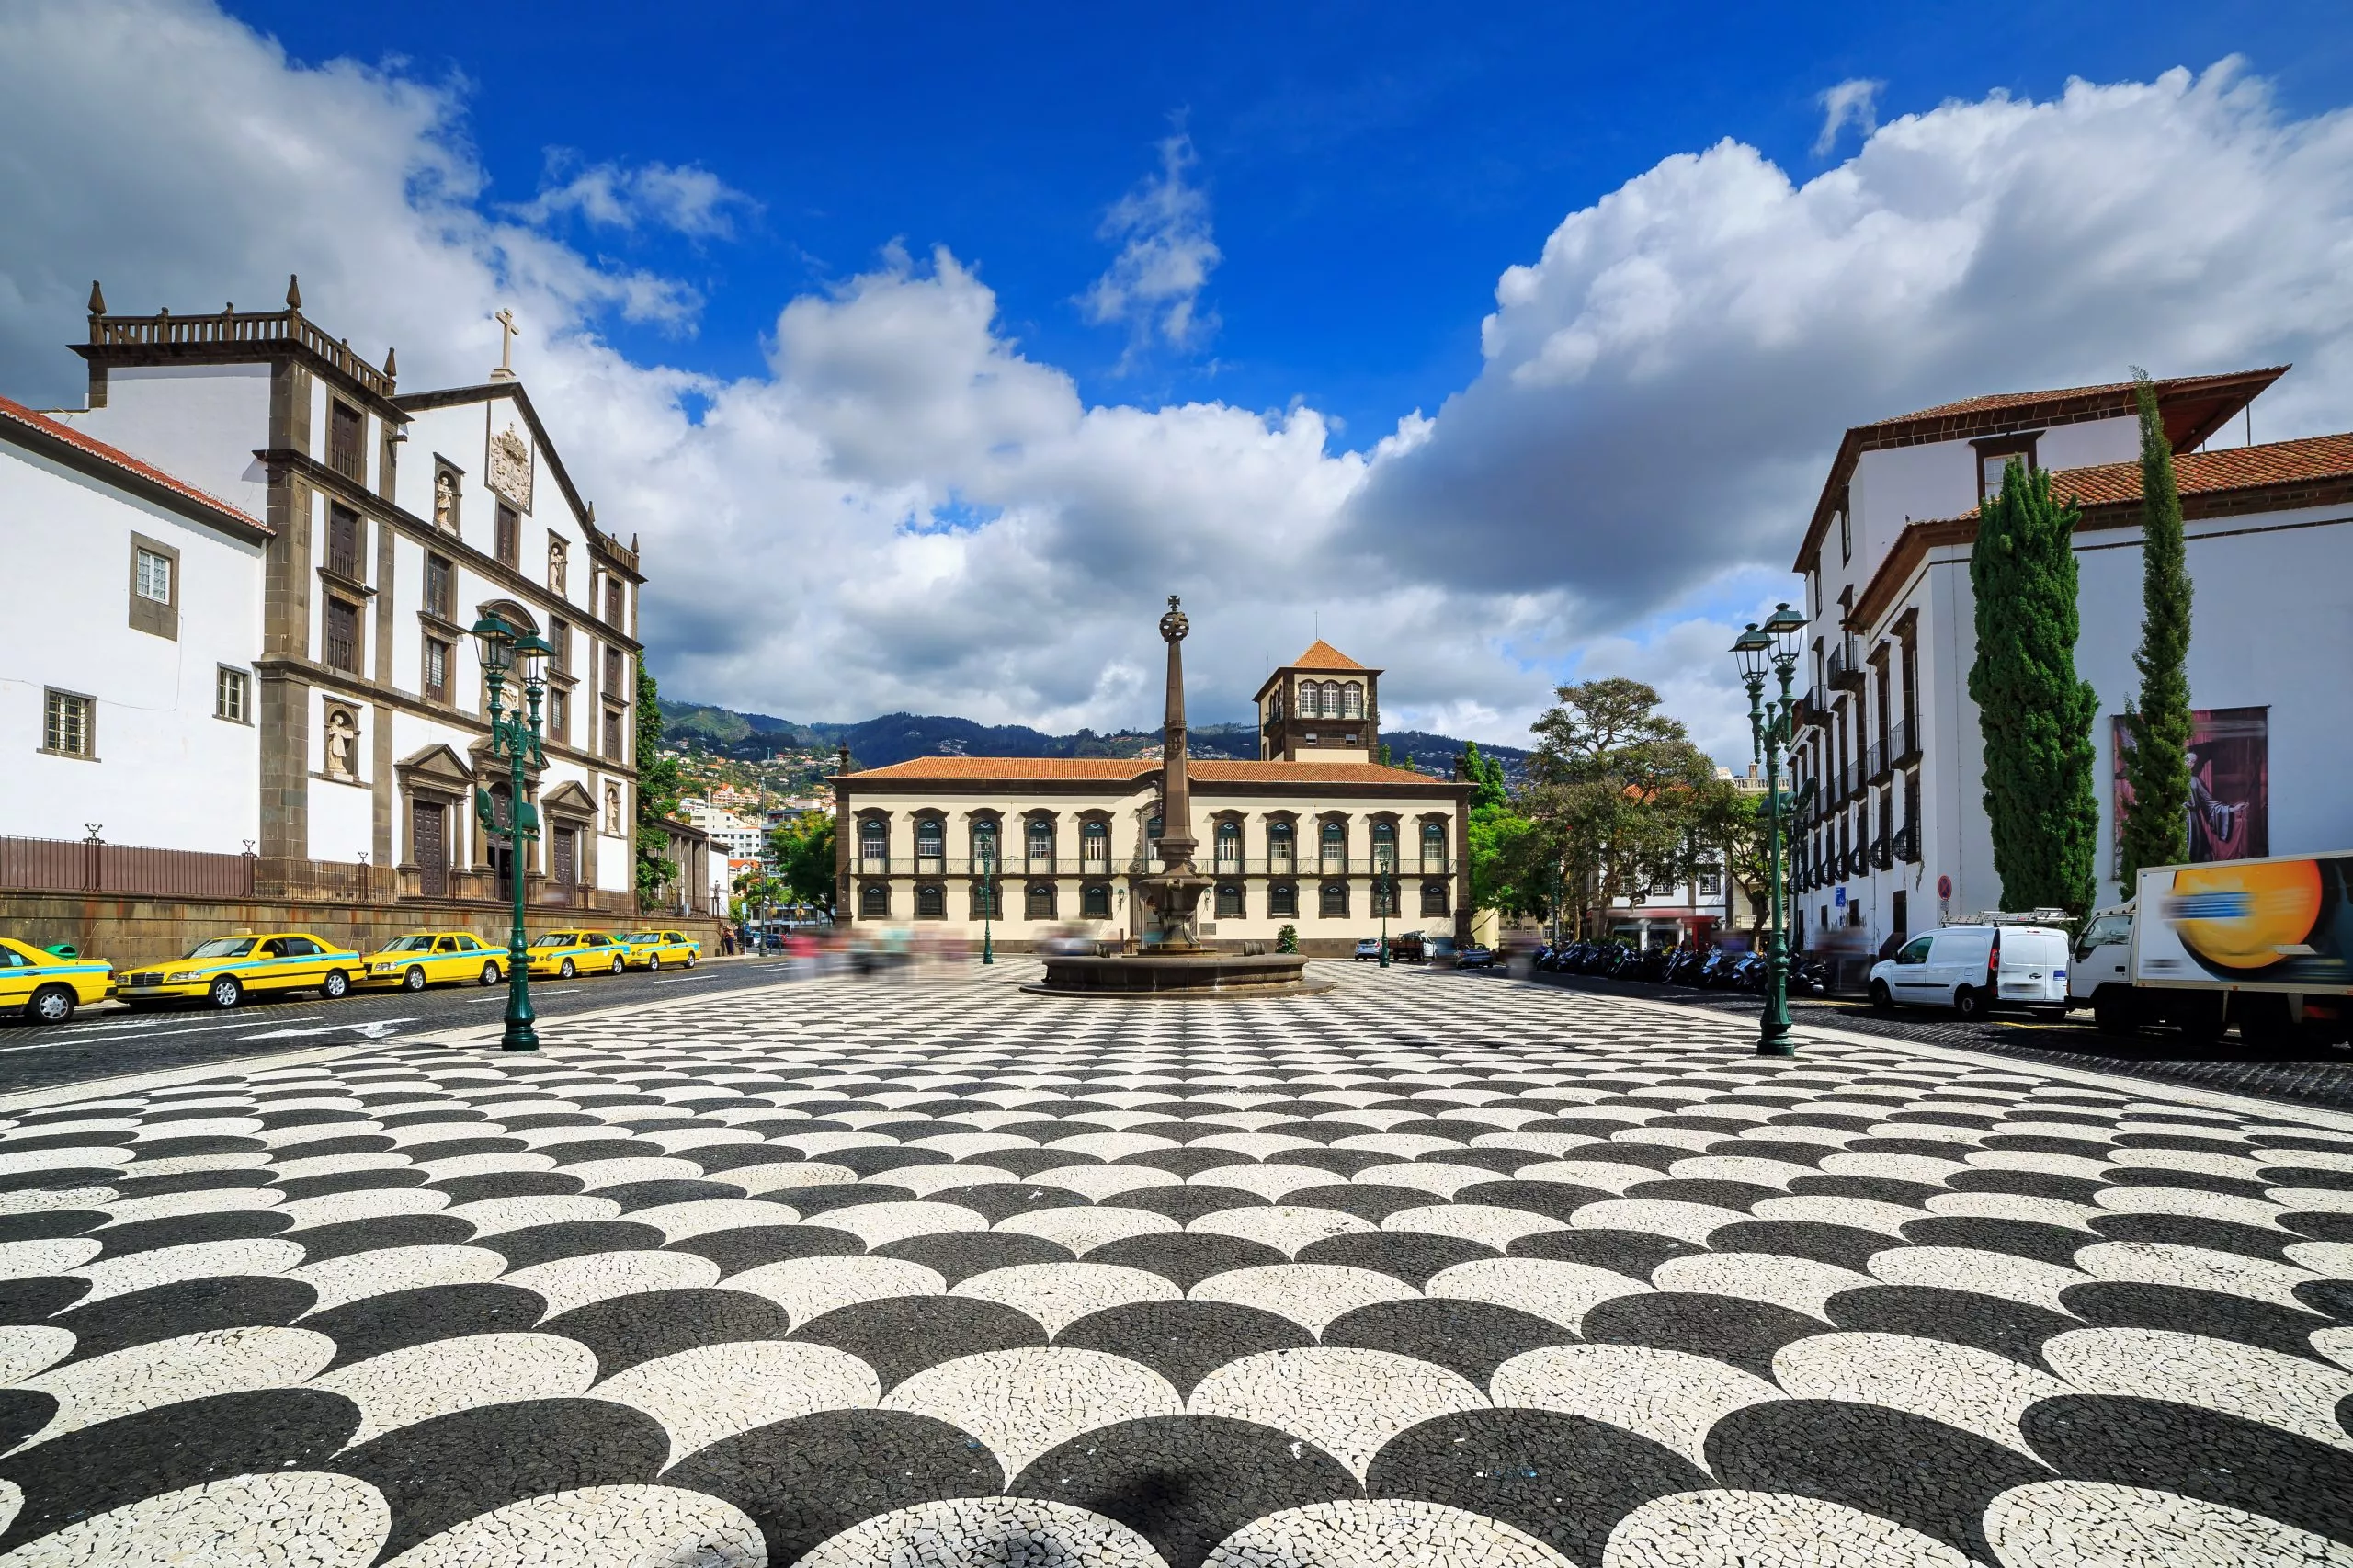 Beautiful cityscape of the townsquare Praca do Municipio in Funchal, Madeira, with the Church of St. John the Evangelist and the city hall, on a summer day with blue sky and clouds